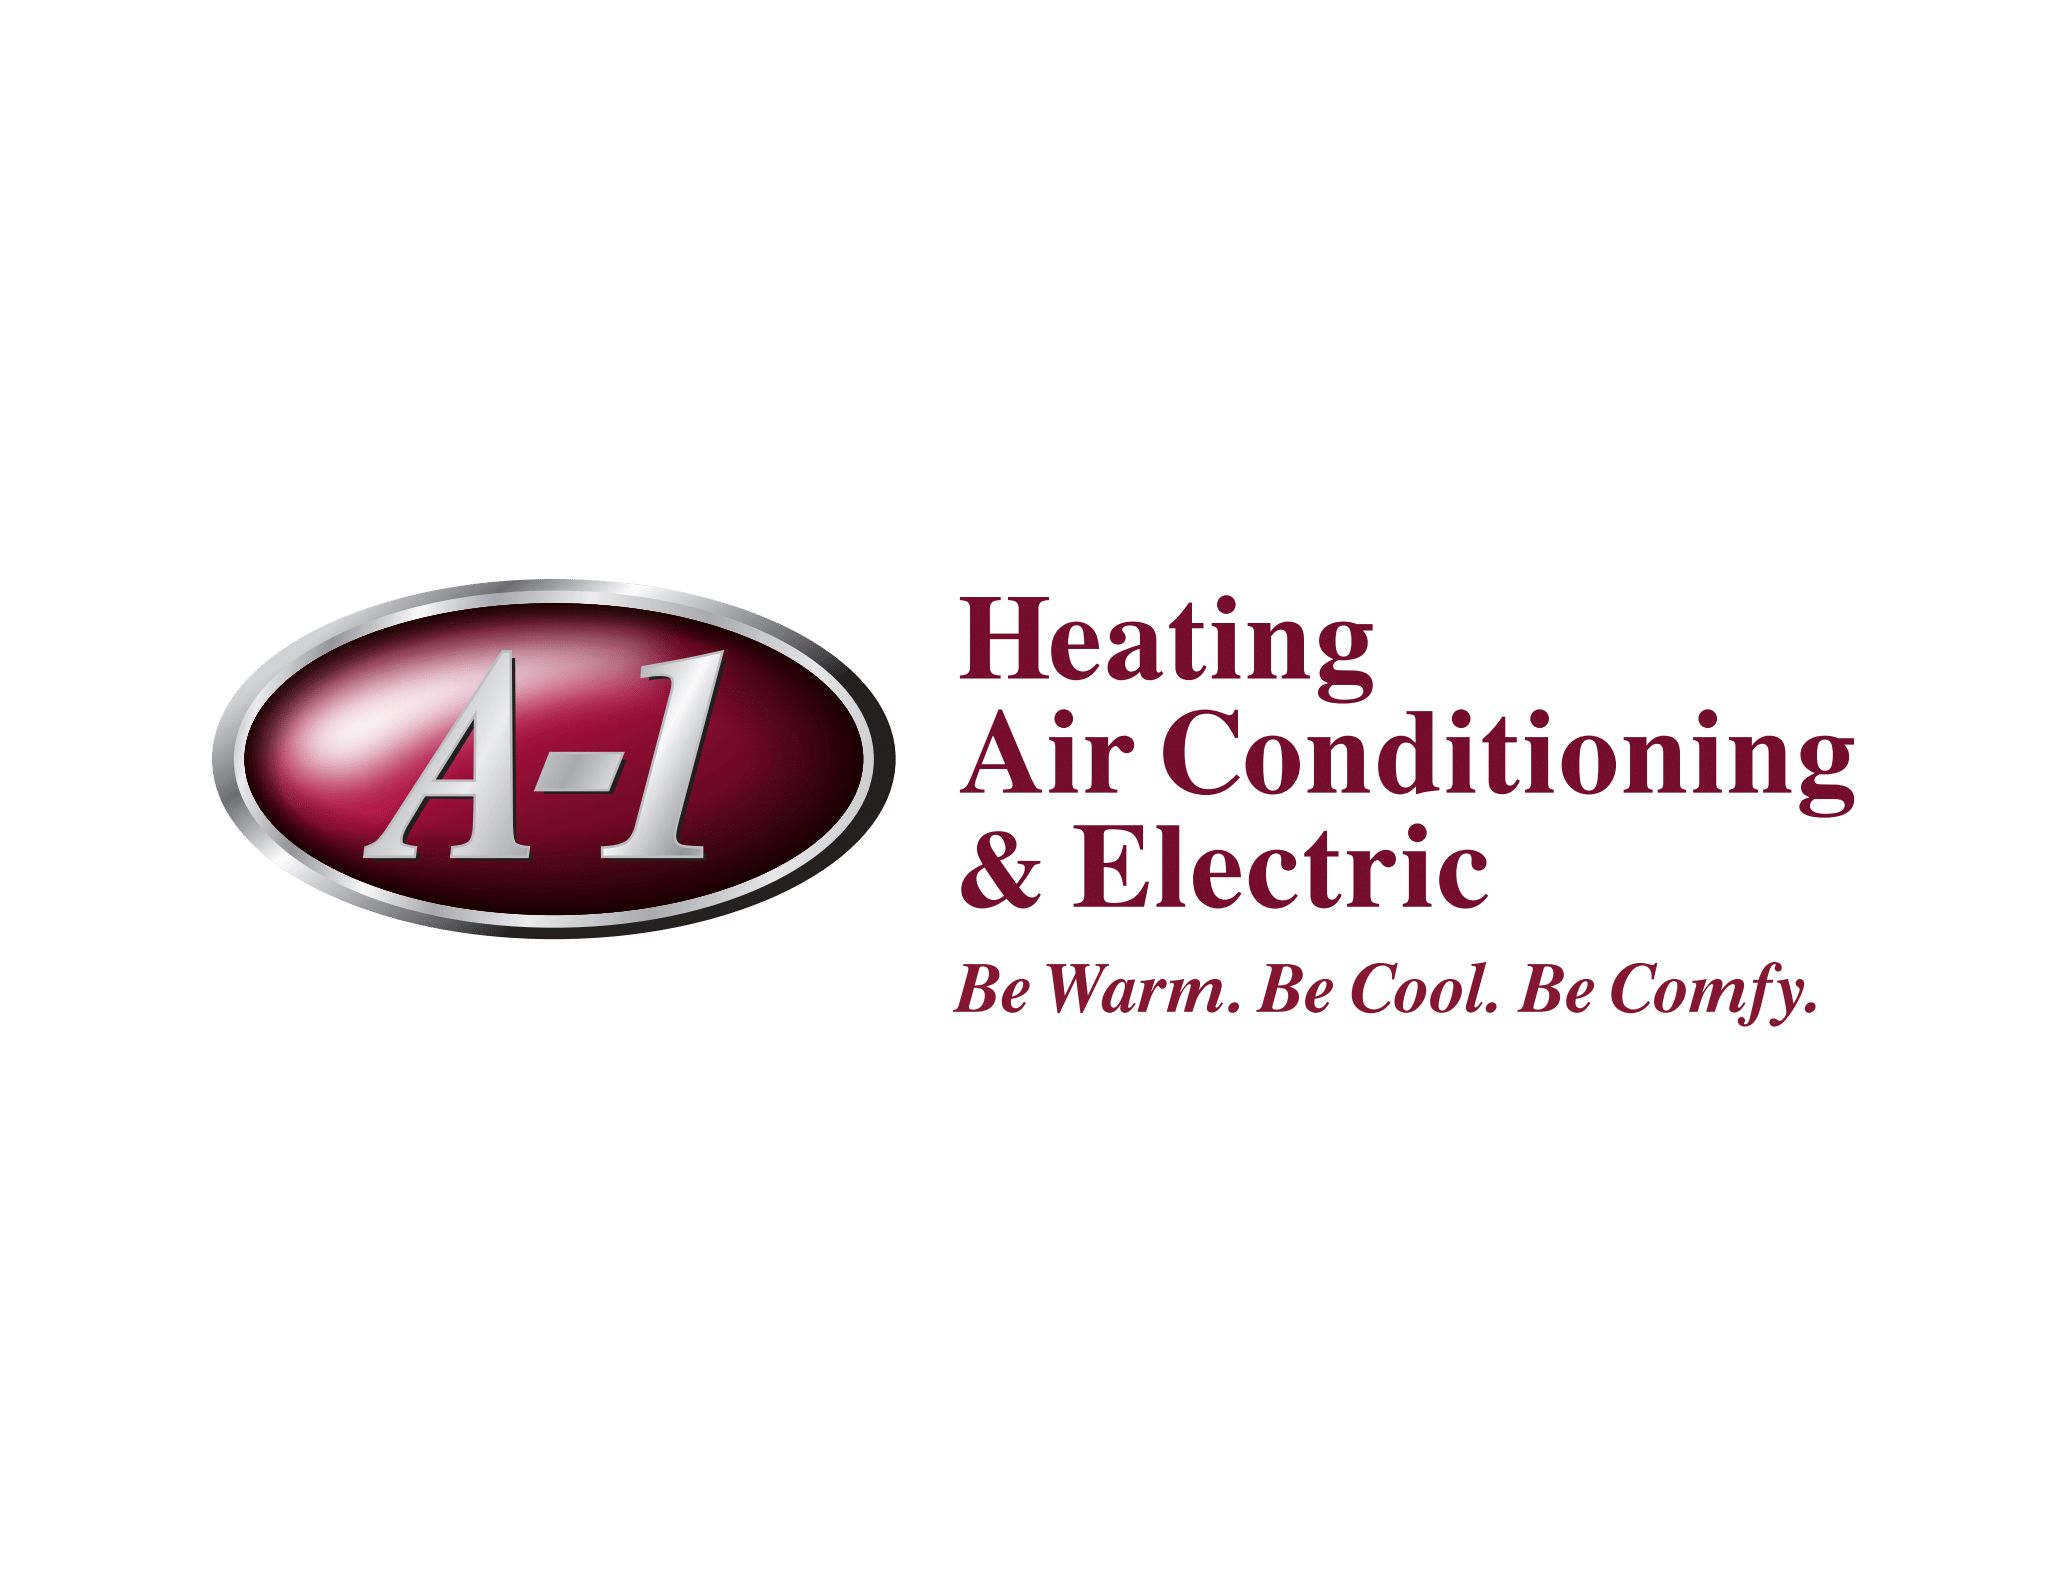 A-1 Heating & Air Conditioning Company